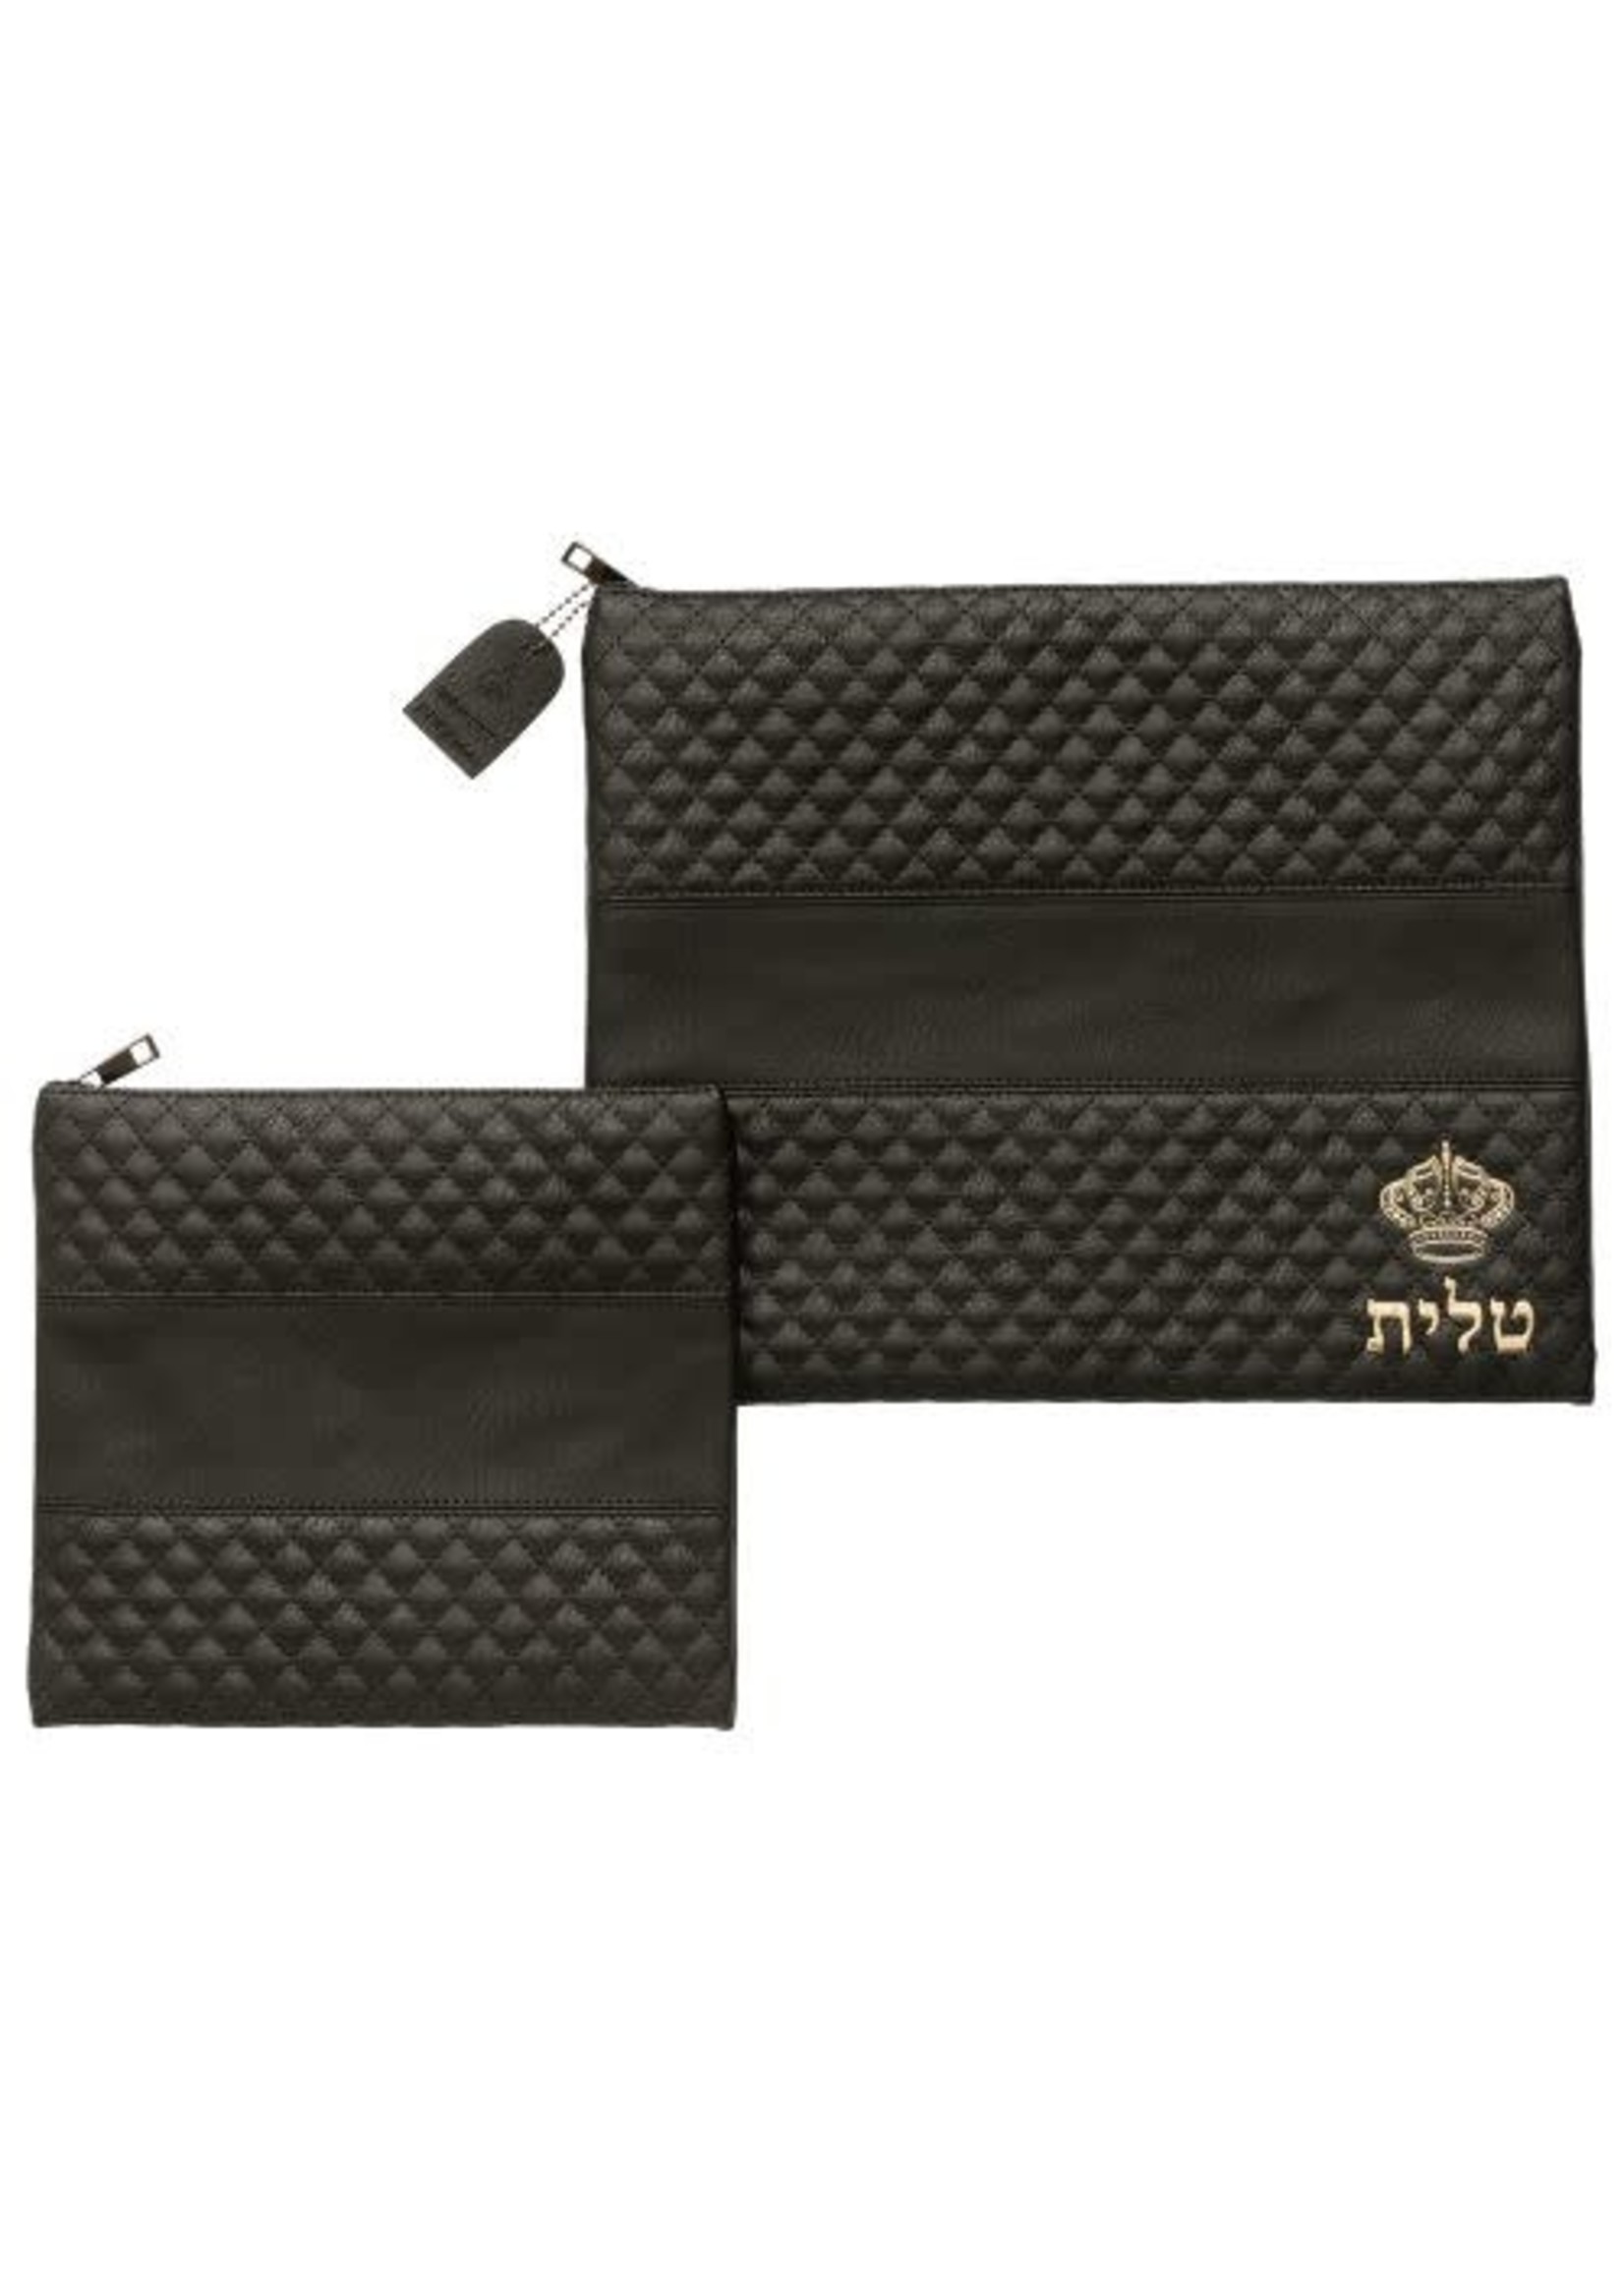 LEATHER LIKE TALIT AND TEFILIN BAG BLACK WITH GOLD CROWN